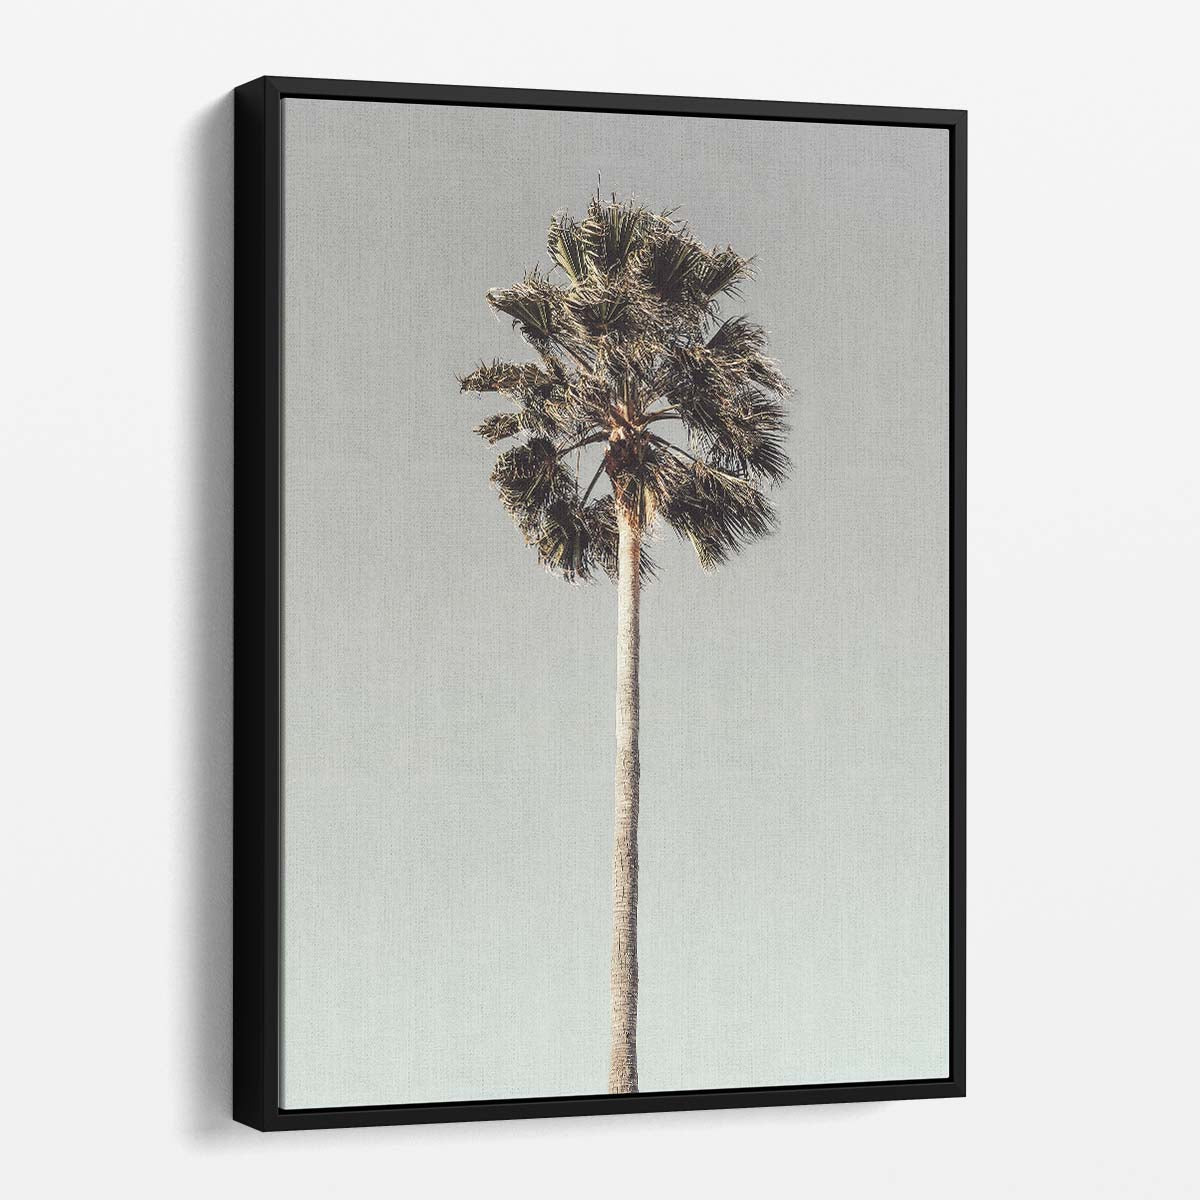 Minimalist Tropical Palm Tree Landscape Photography, Exotic Gray Sky by Luxuriance Designs, made in USA